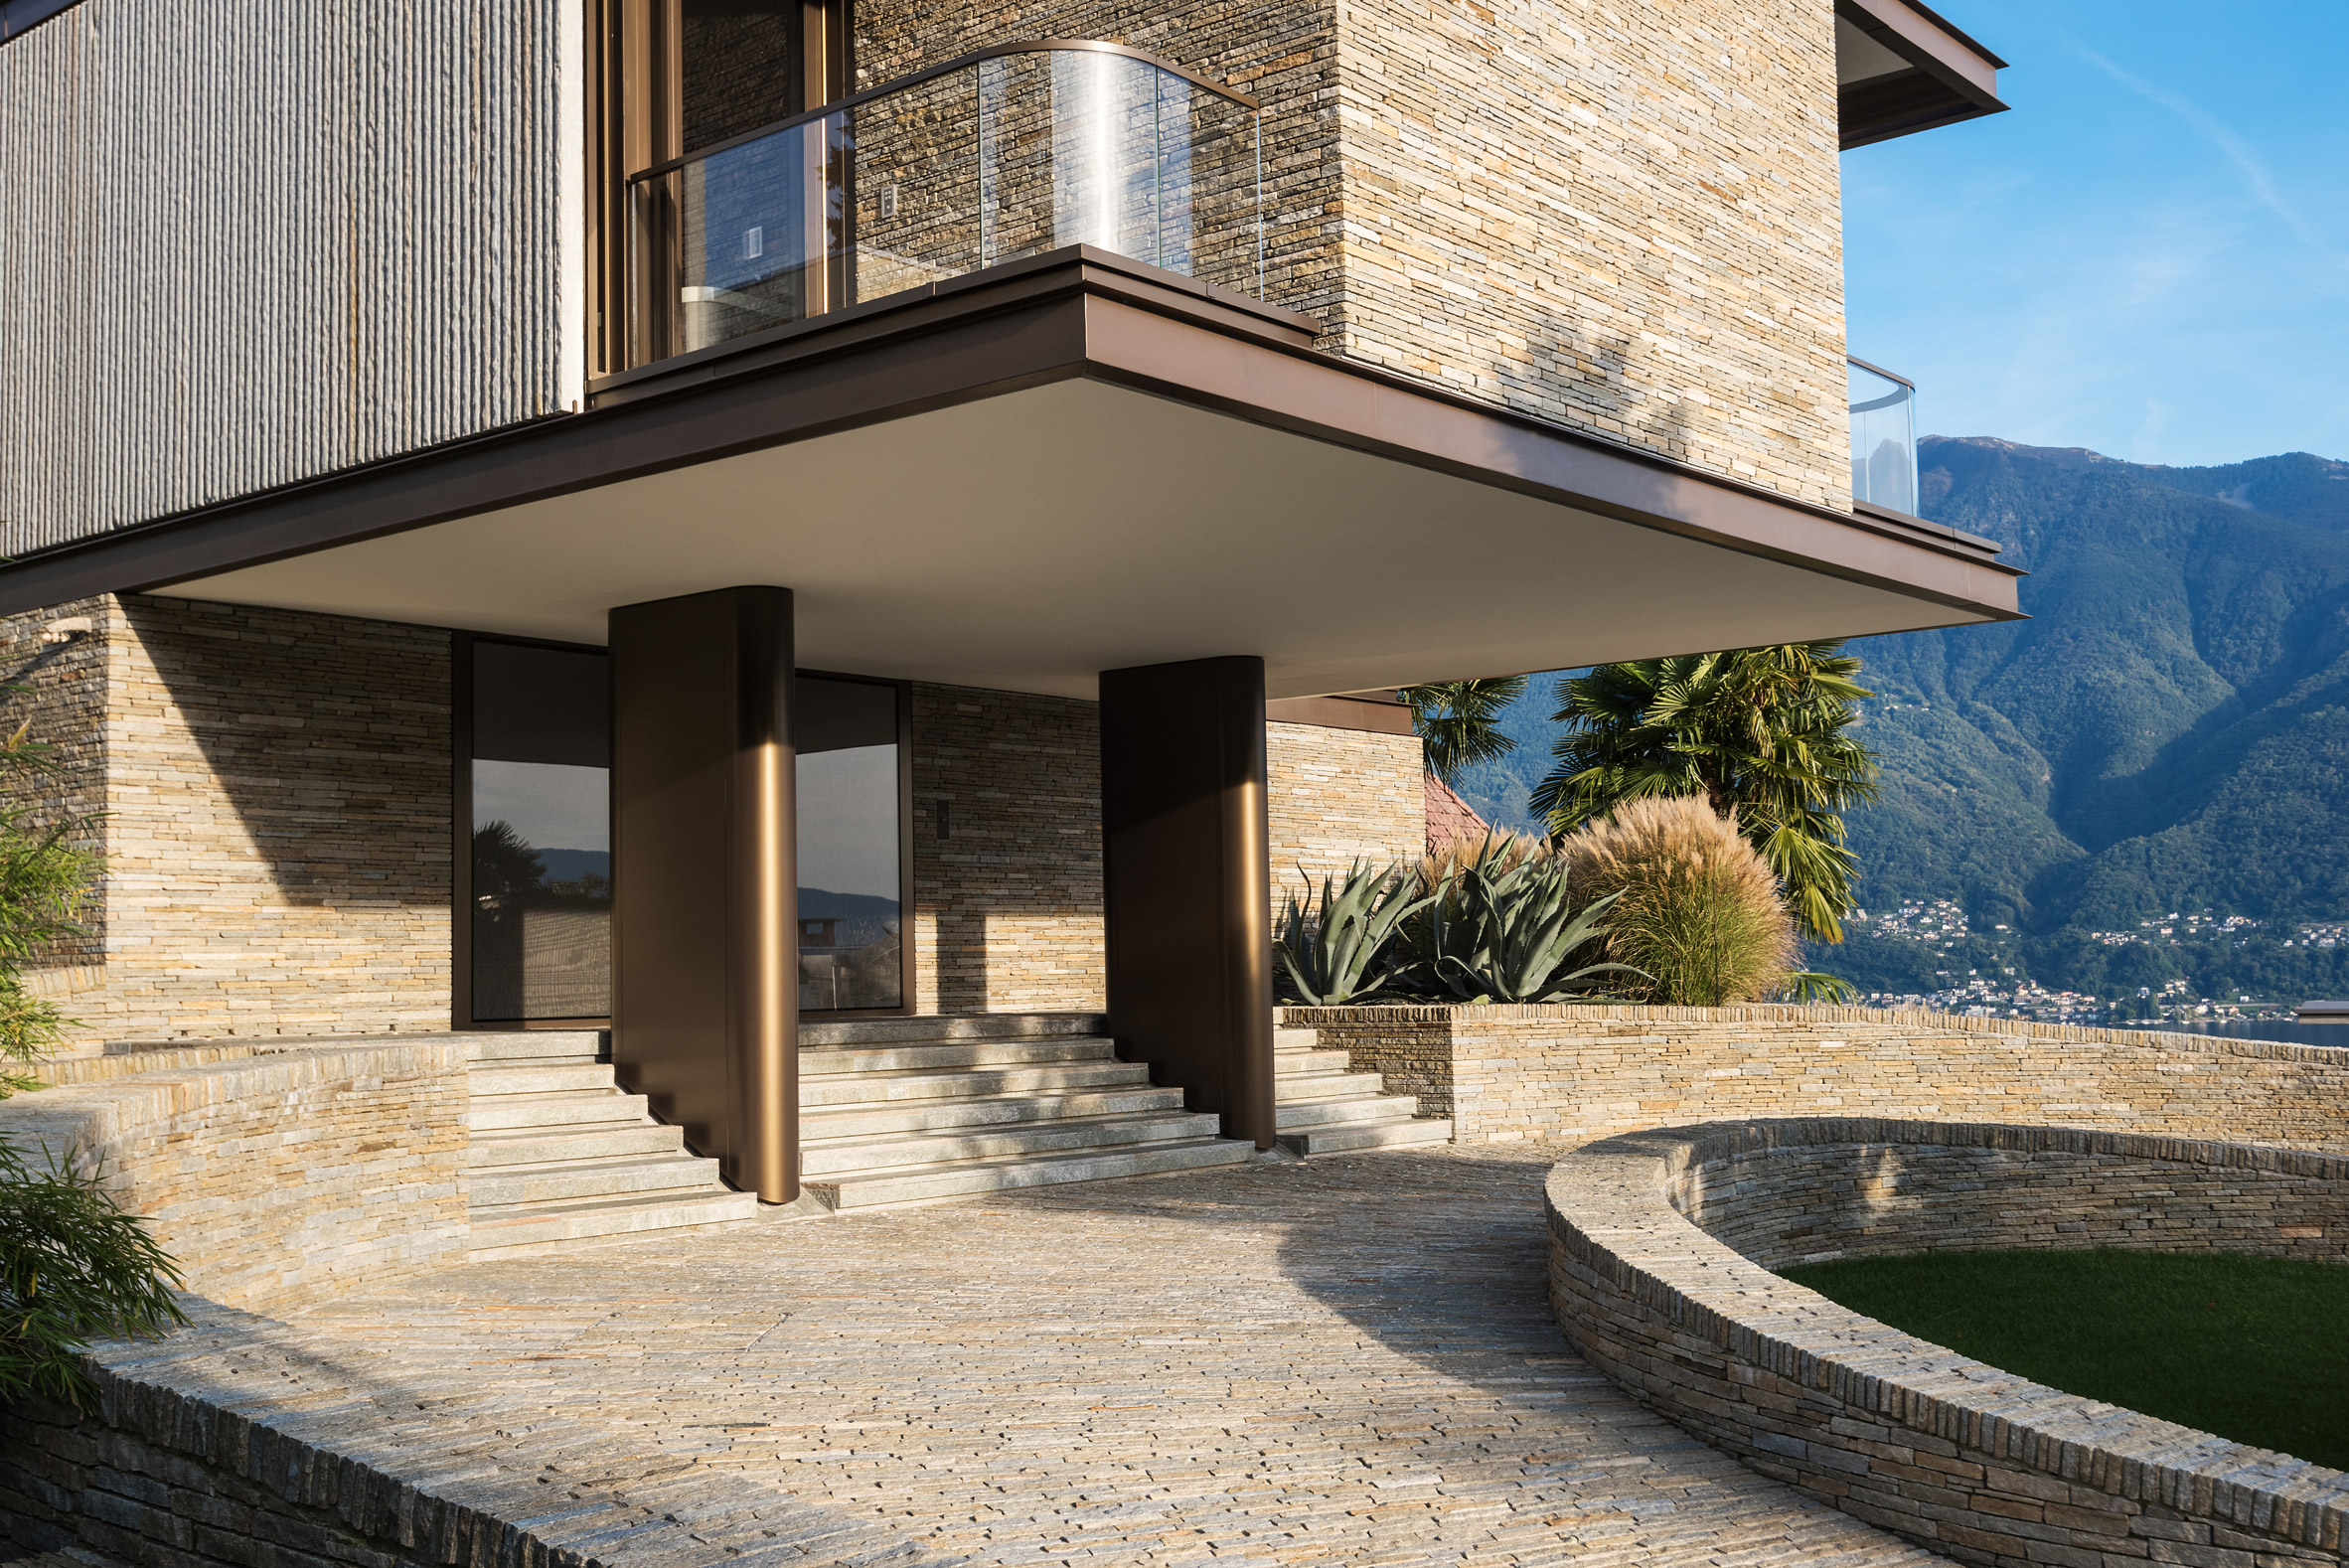 Exterior entrance of rectilinear cantilevered house by Küchel Architects in Switzerland